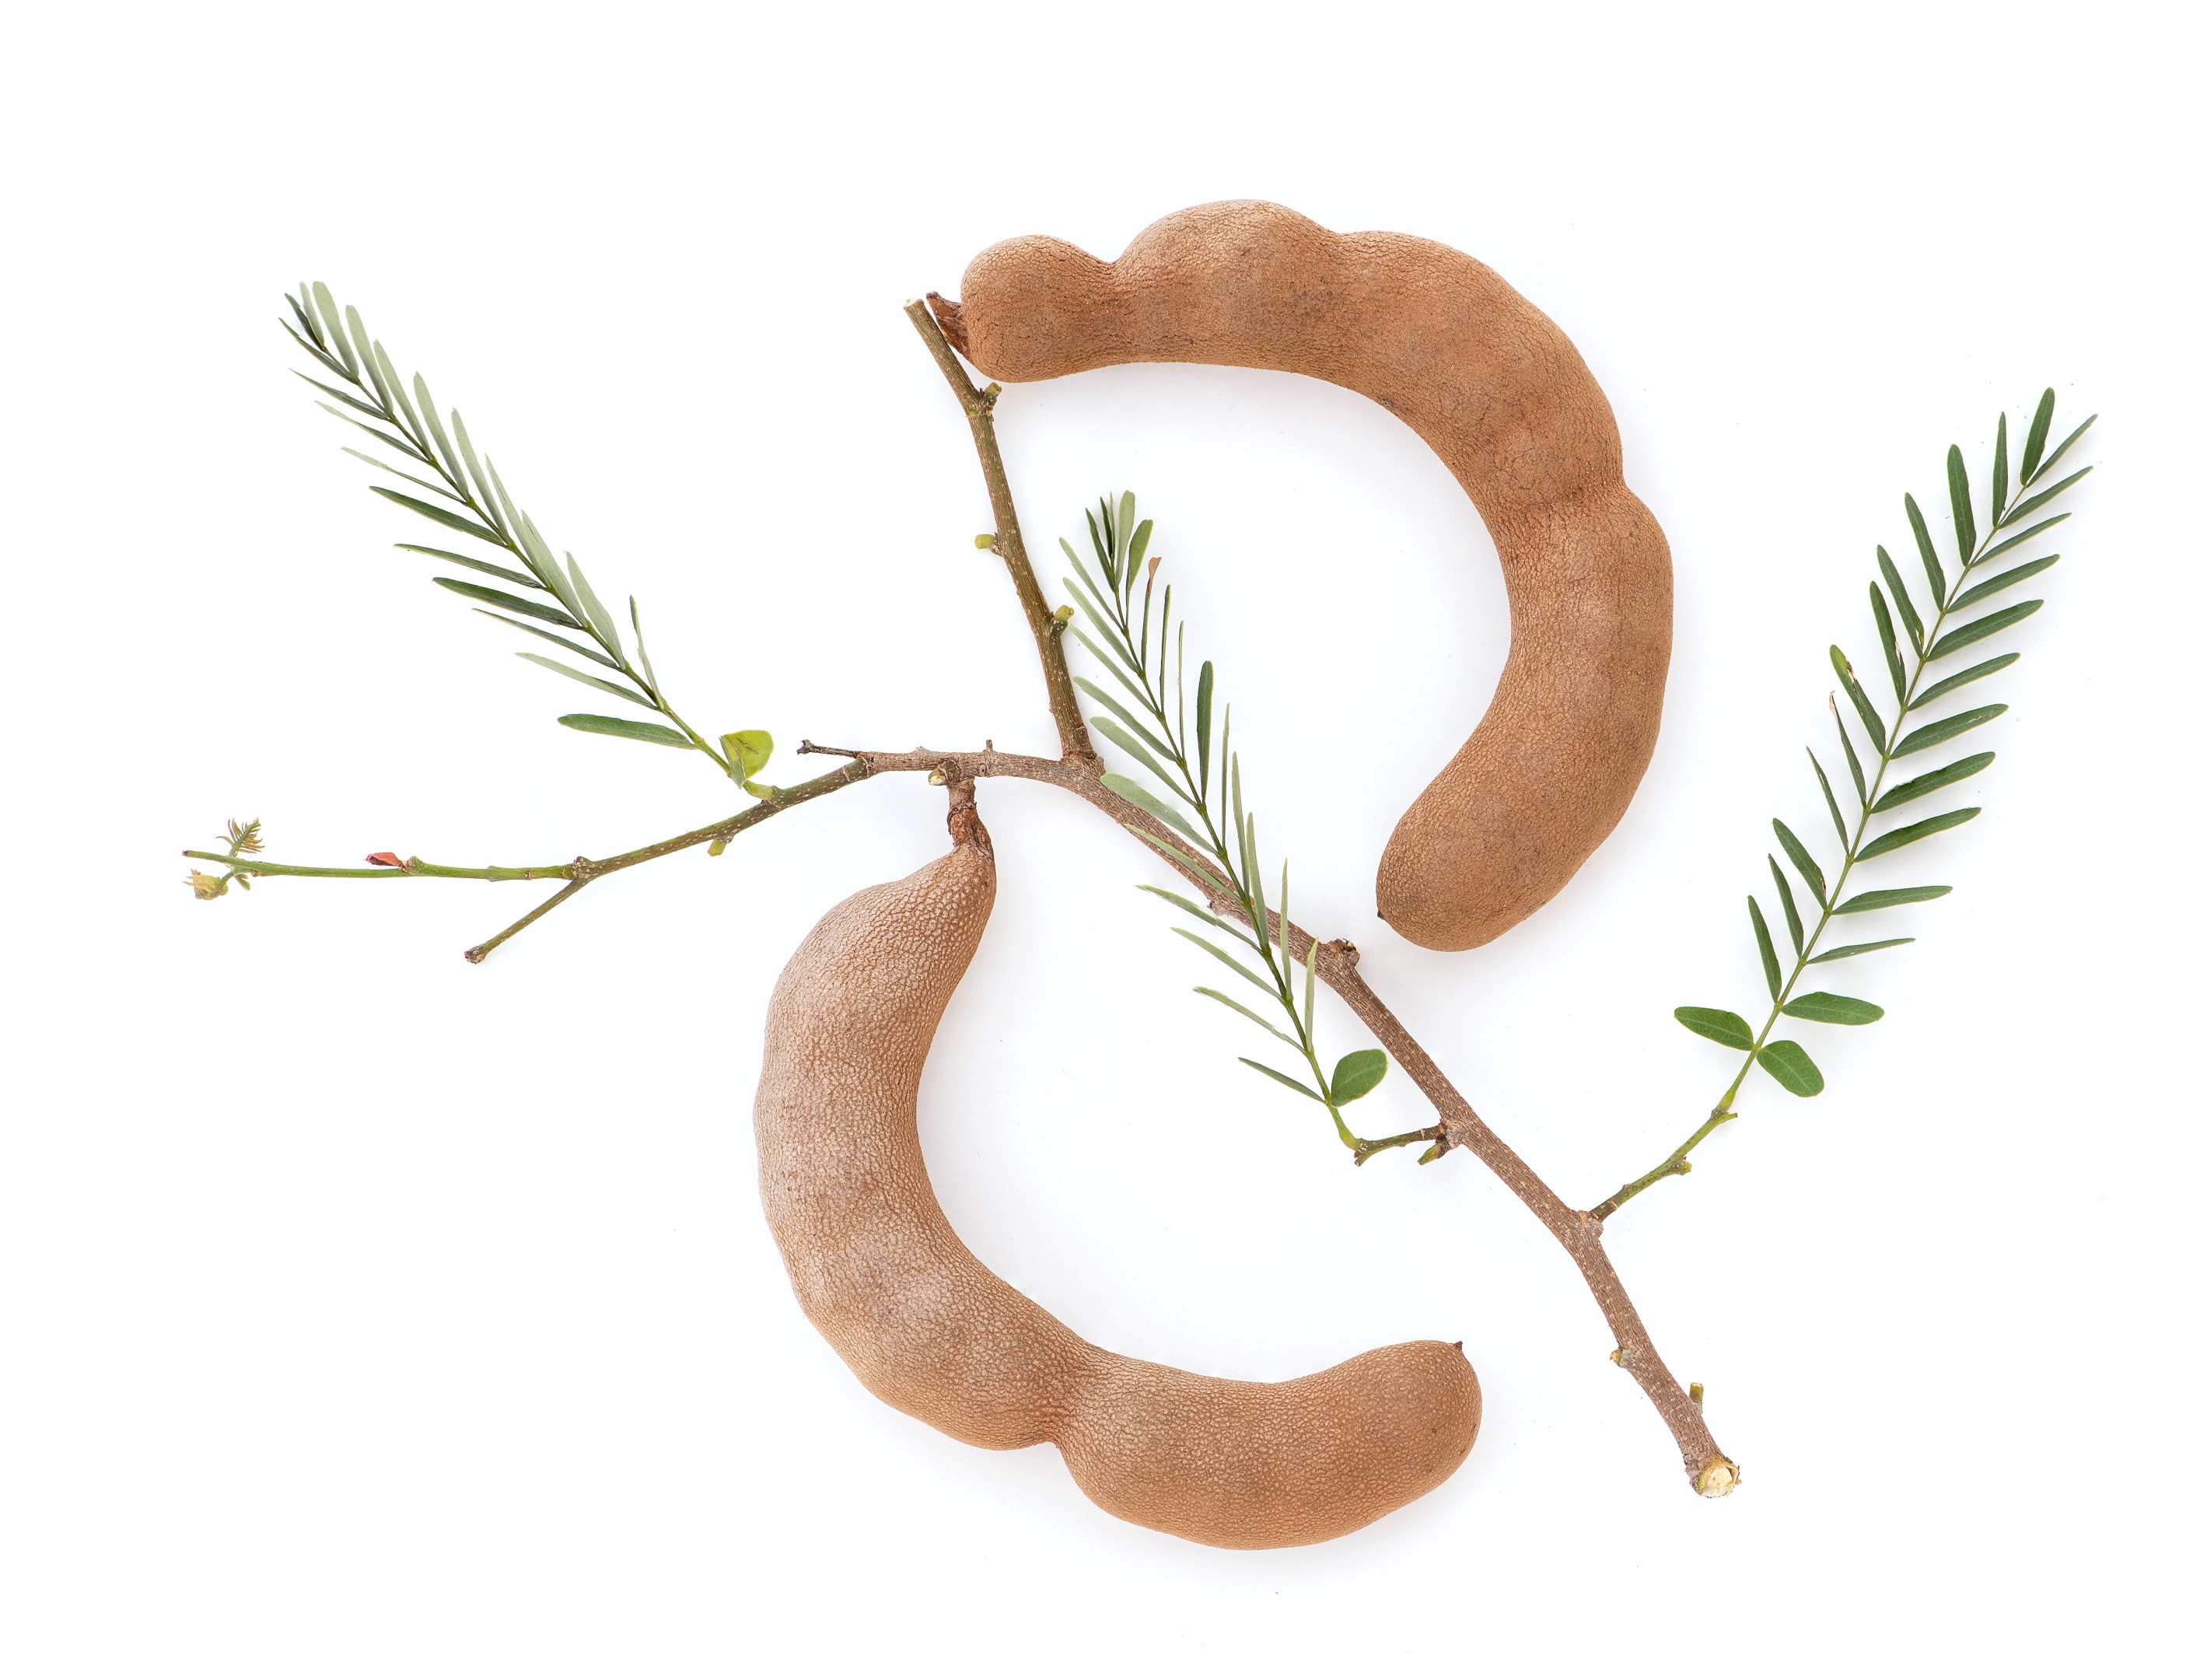 Tamarind fruits with green leaves on white surface